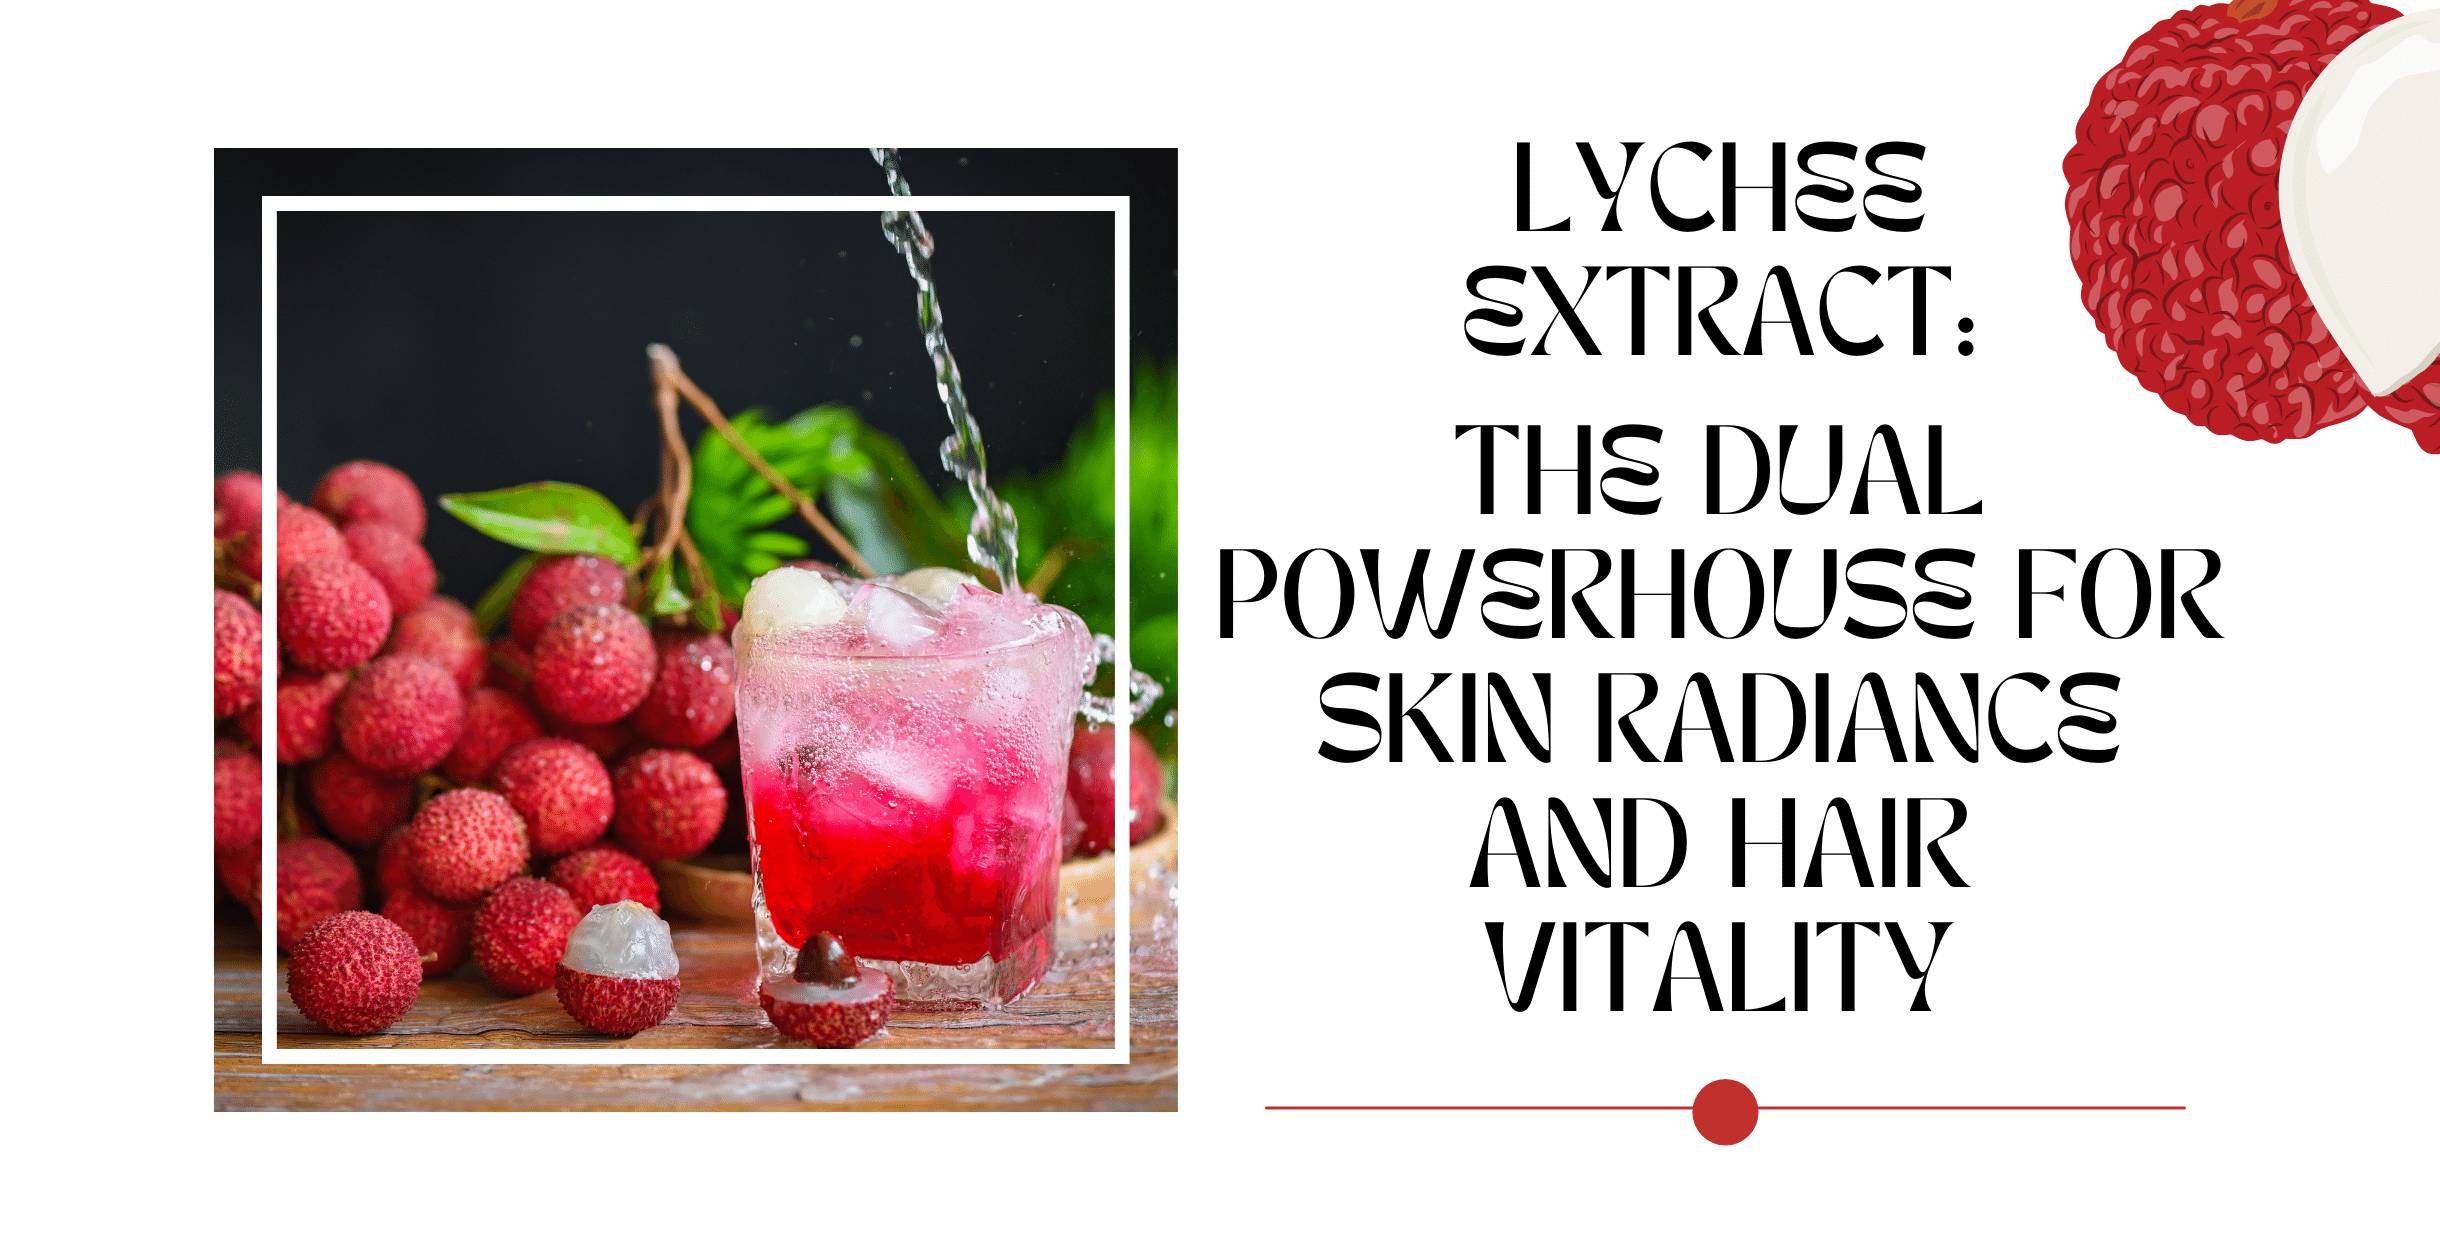 Lychee Extract: The Dual Powerhouse for Skin Radiance and Hair Vitality